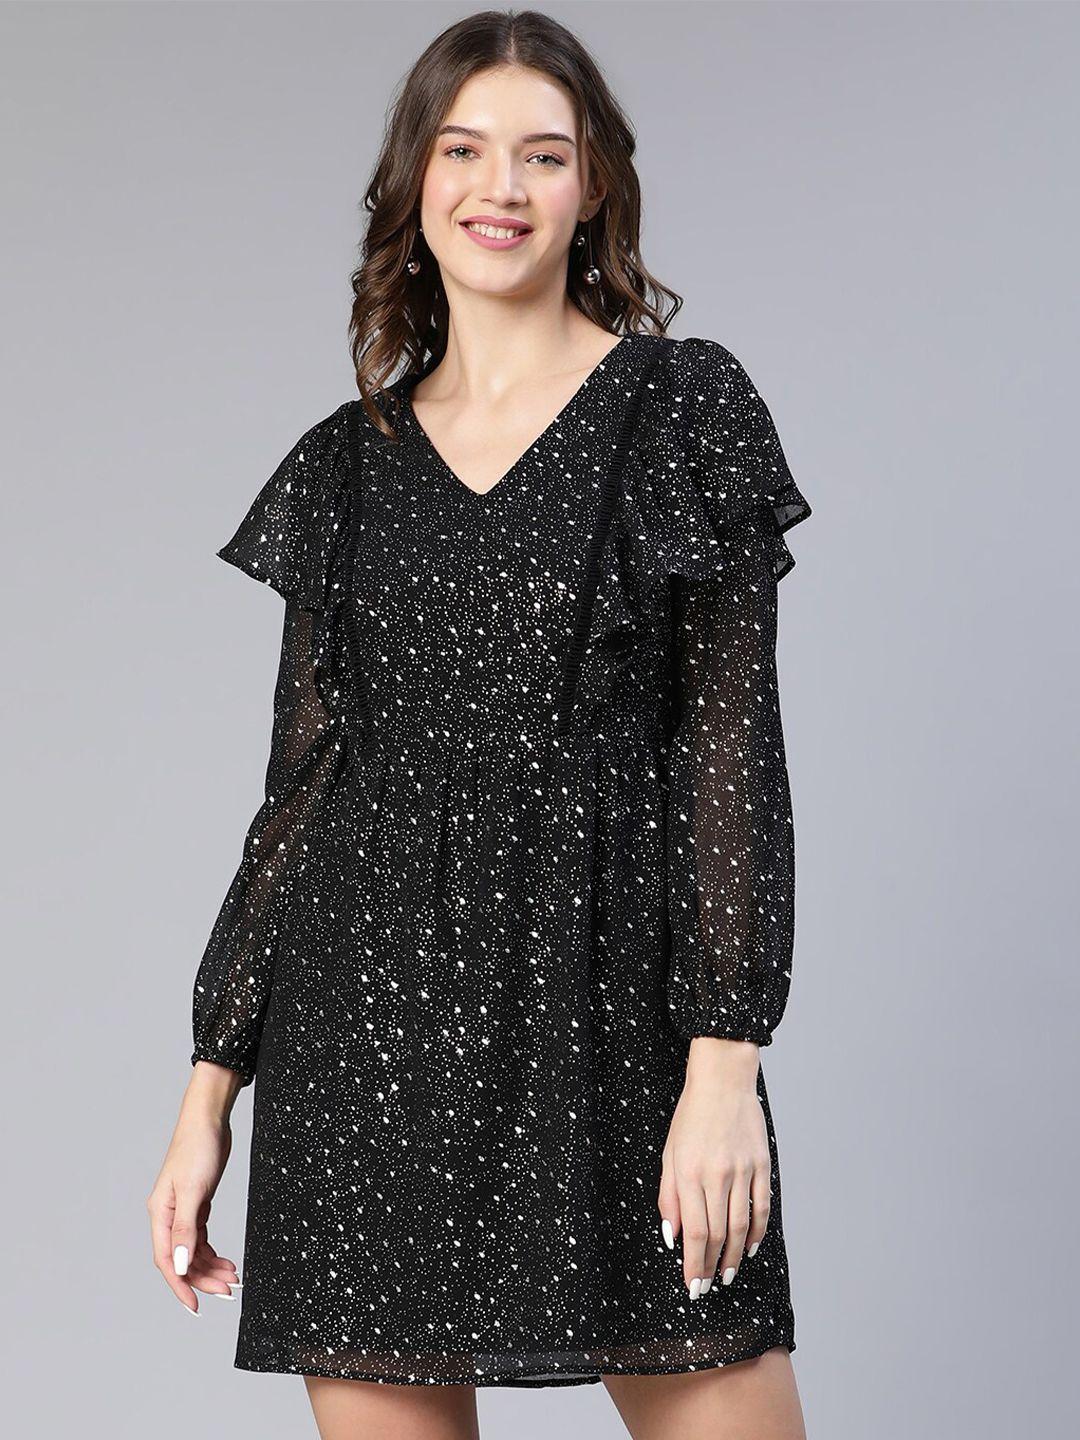 oxolloxo embellished and ruffles fit and flare dress